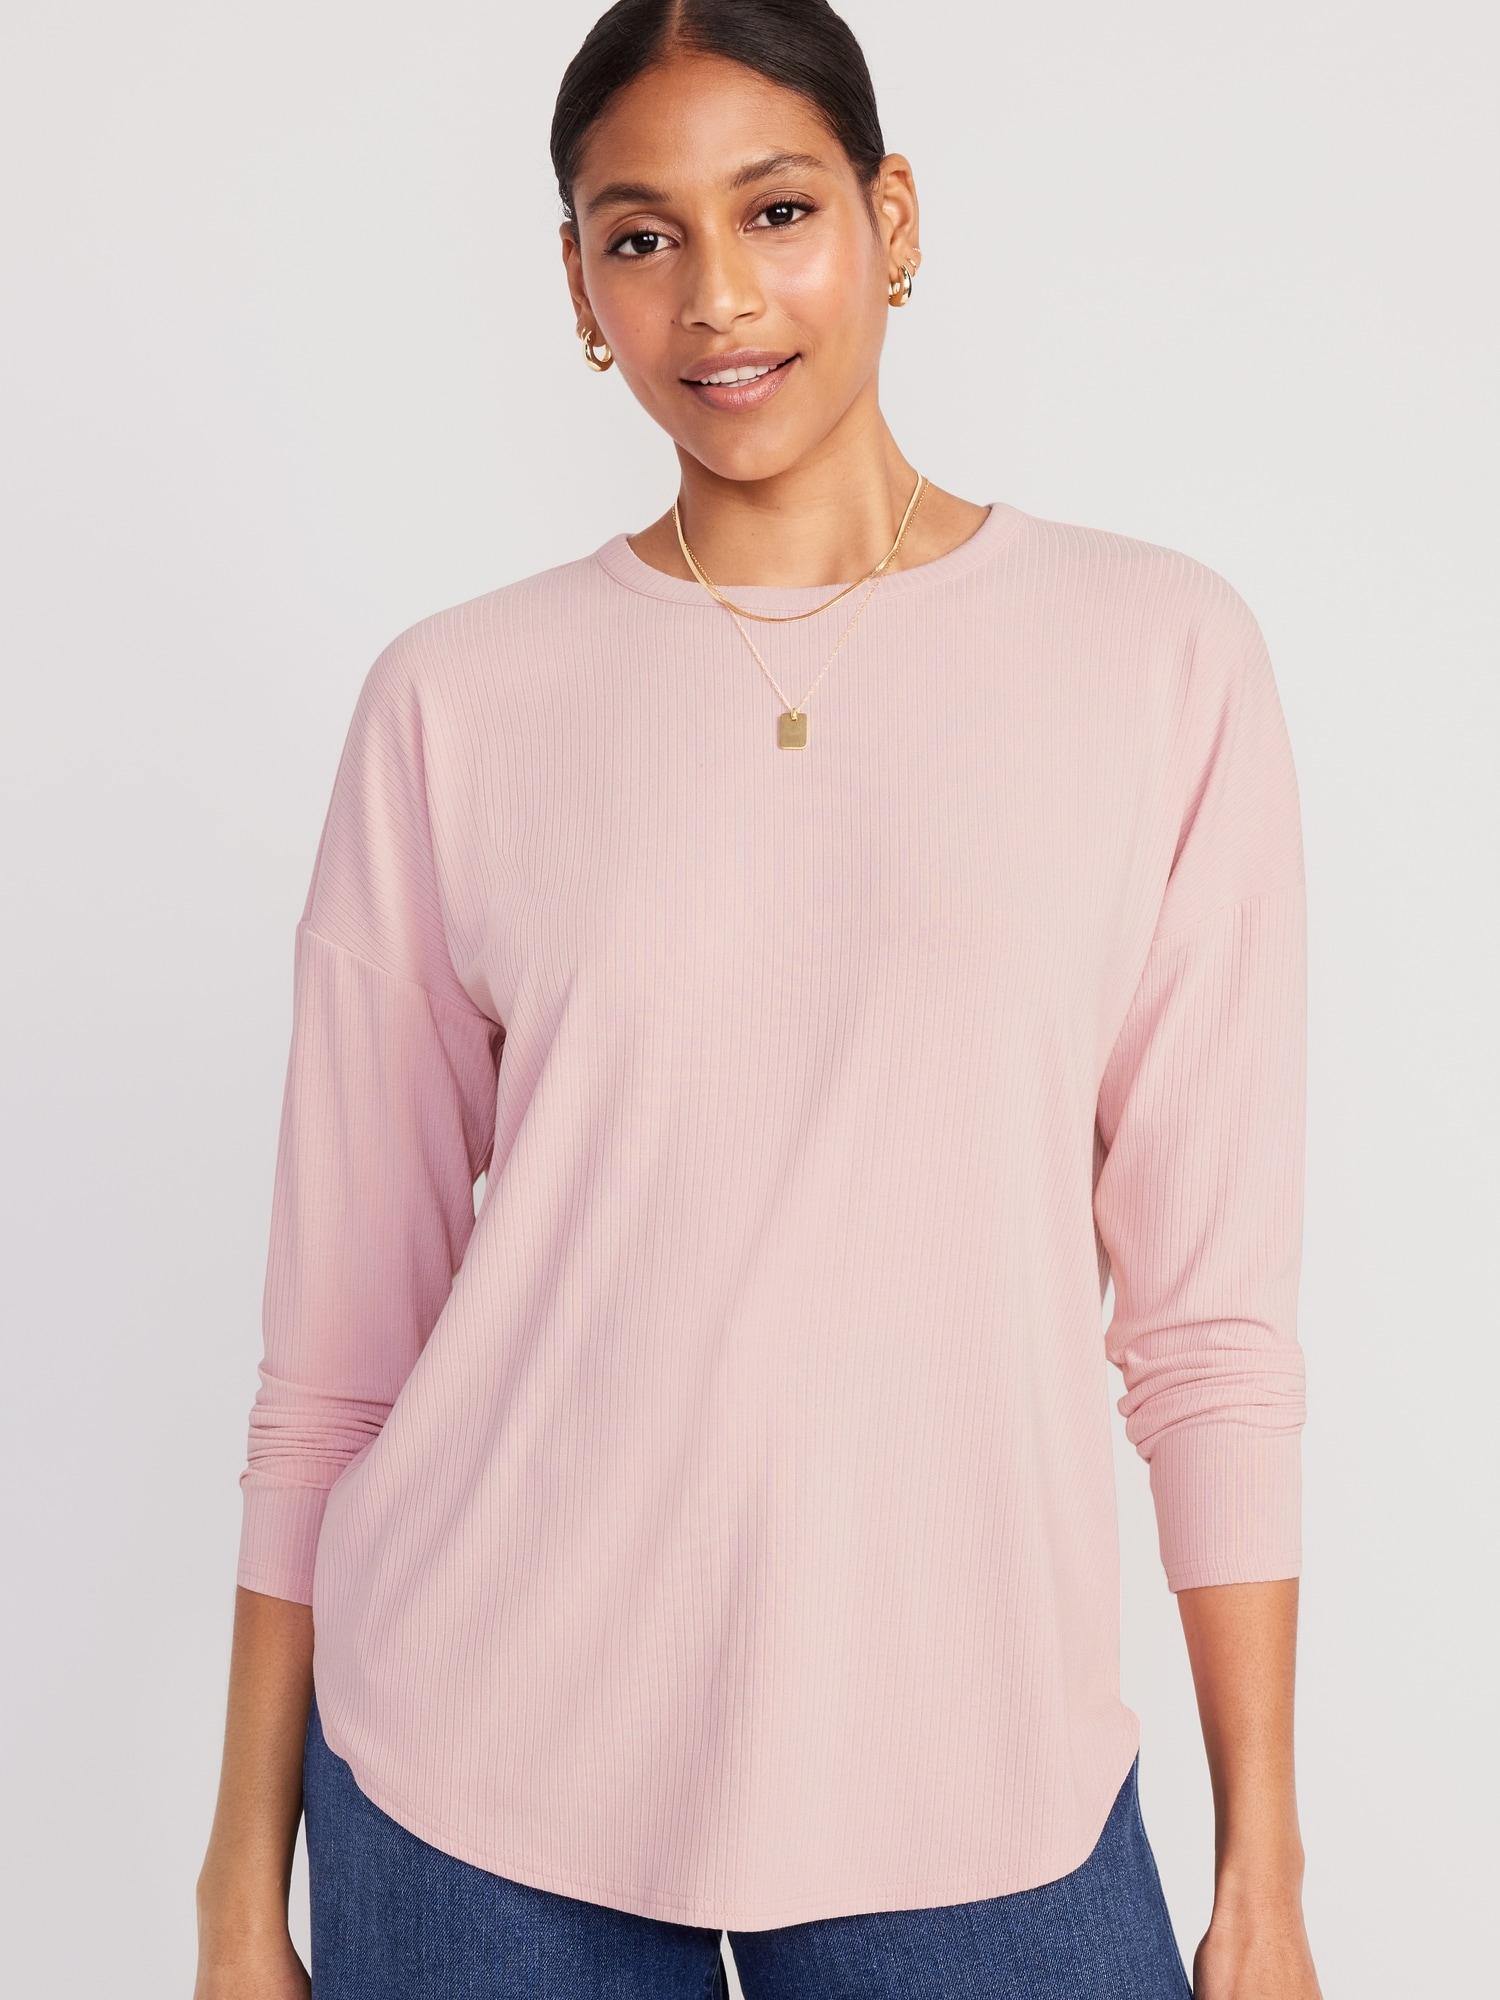 Luxe Rib-Knit Tunic T-Shirt for Women | Old Navy